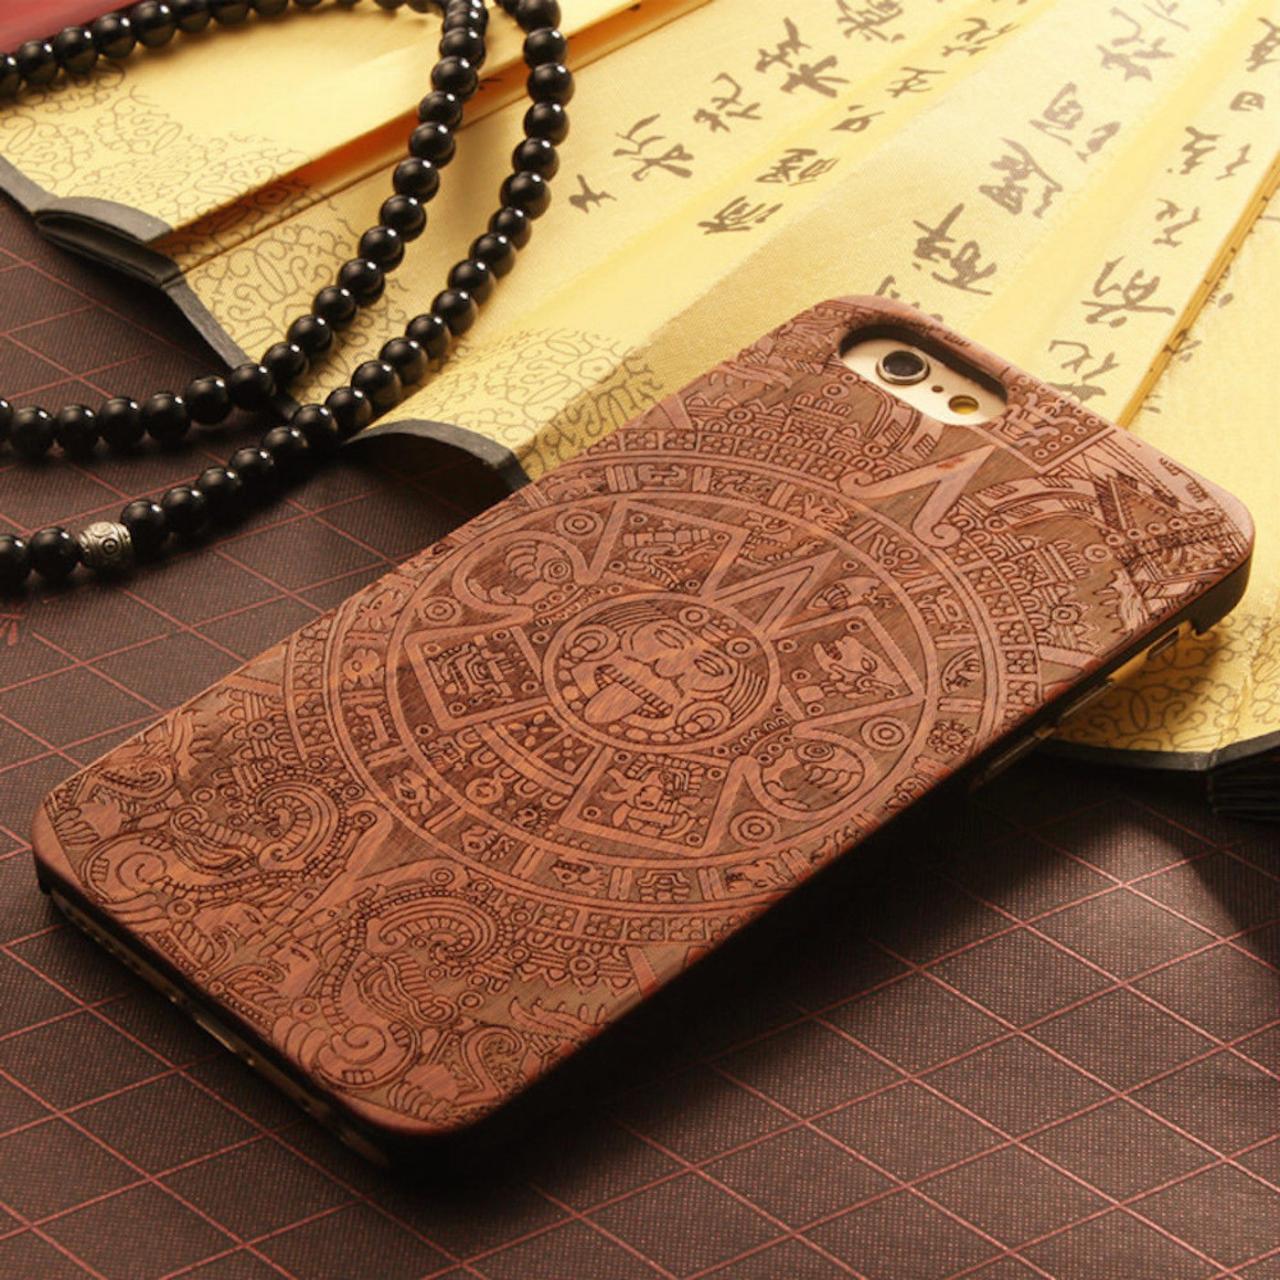 Luxury Natural Wood Wooden Bamboo Hard Cover Phone Case For Apple Iphone 6/6s/plus, God Totem